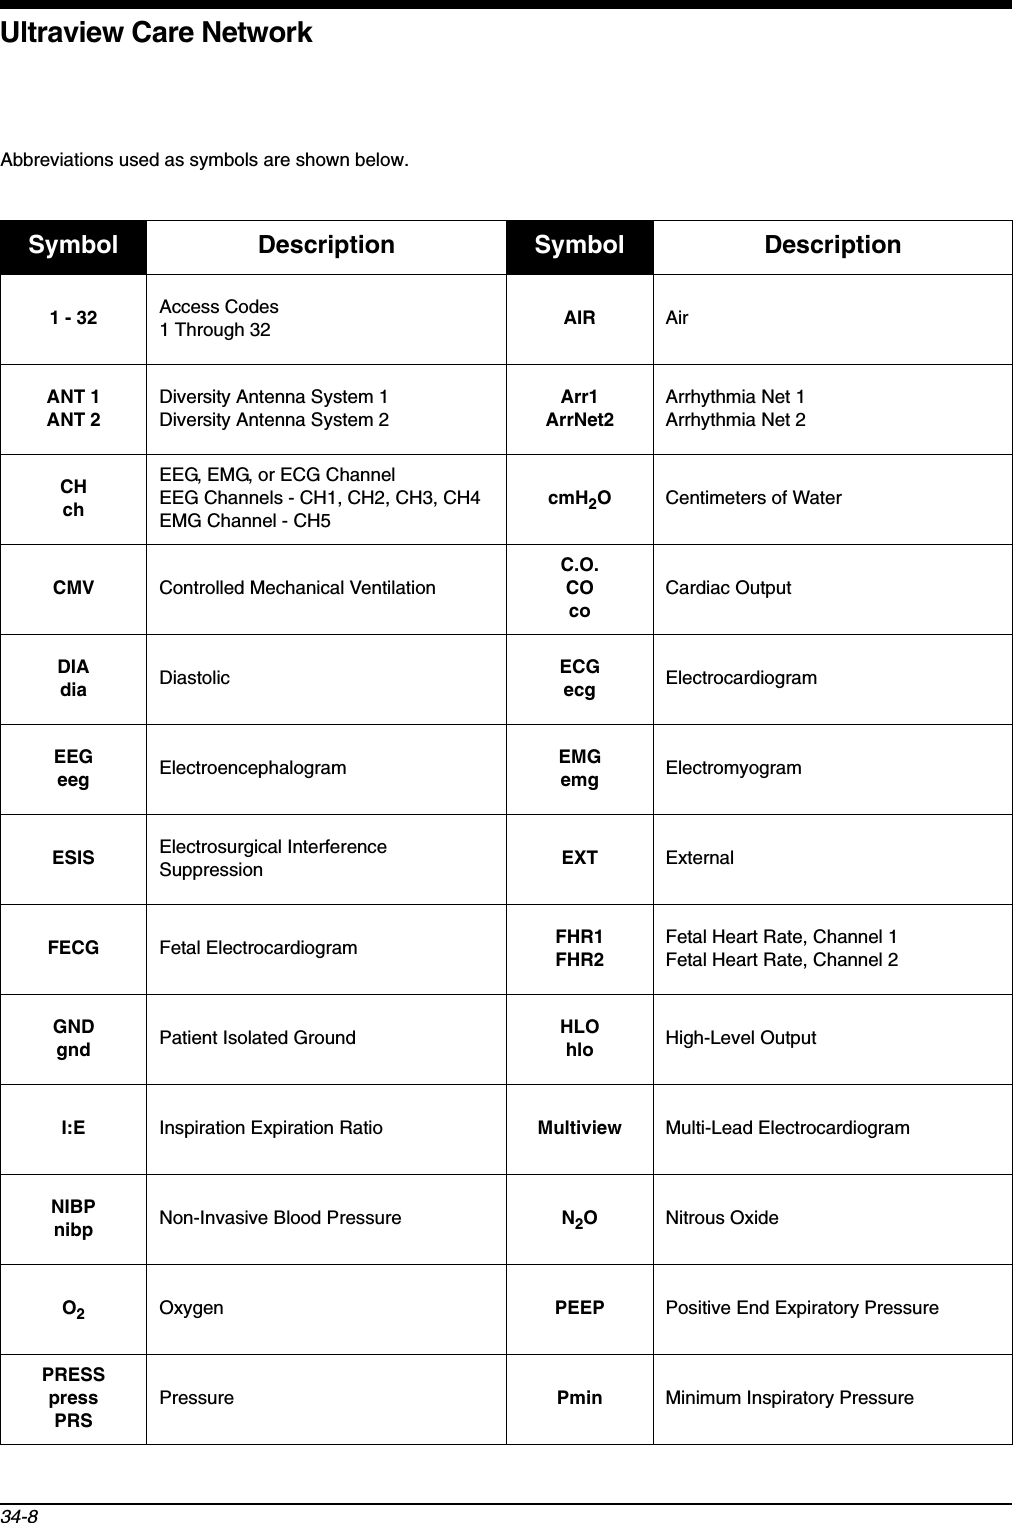 Ultraview Care Network34-8Abbreviations used as symbols are shown below.Symbol Description Symbol Description1 - 32 Access Codes1 Through 32 AIR AirANT 1ANT 2Diversity Antenna System 1Diversity Antenna System 2Arr1ArrNet2Arrhythmia Net 1Arrhythmia Net 2CHchEEG, EMG, or ECG ChannelEEG Channels - CH1, CH2, CH3, CH4EMG Channel - CH5cmH2OCentimeters of WaterCMV Controlled Mechanical VentilationC.O.COcoCardiac OutputDIAdia Diastolic ECGecg ElectrocardiogramEEGeeg Electroencephalogram EMGemg ElectromyogramESIS Electrosurgical Interference Suppression EXT ExternalFECG Fetal Electrocardiogram FHR1FHR2Fetal Heart Rate, Channel 1Fetal Heart Rate, Channel 2GNDgnd Patient Isolated Ground HLOhlo High-Level OutputI:E Inspiration Expiration Ratio Multiview Multi-Lead ElectrocardiogramNIBPnibp Non-Invasive Blood Pressure N2ONitrous OxideO2Oxygen PEEP Positive End Expiratory PressurePRESSpressPRSPressure Pmin Minimum Inspiratory Pressure